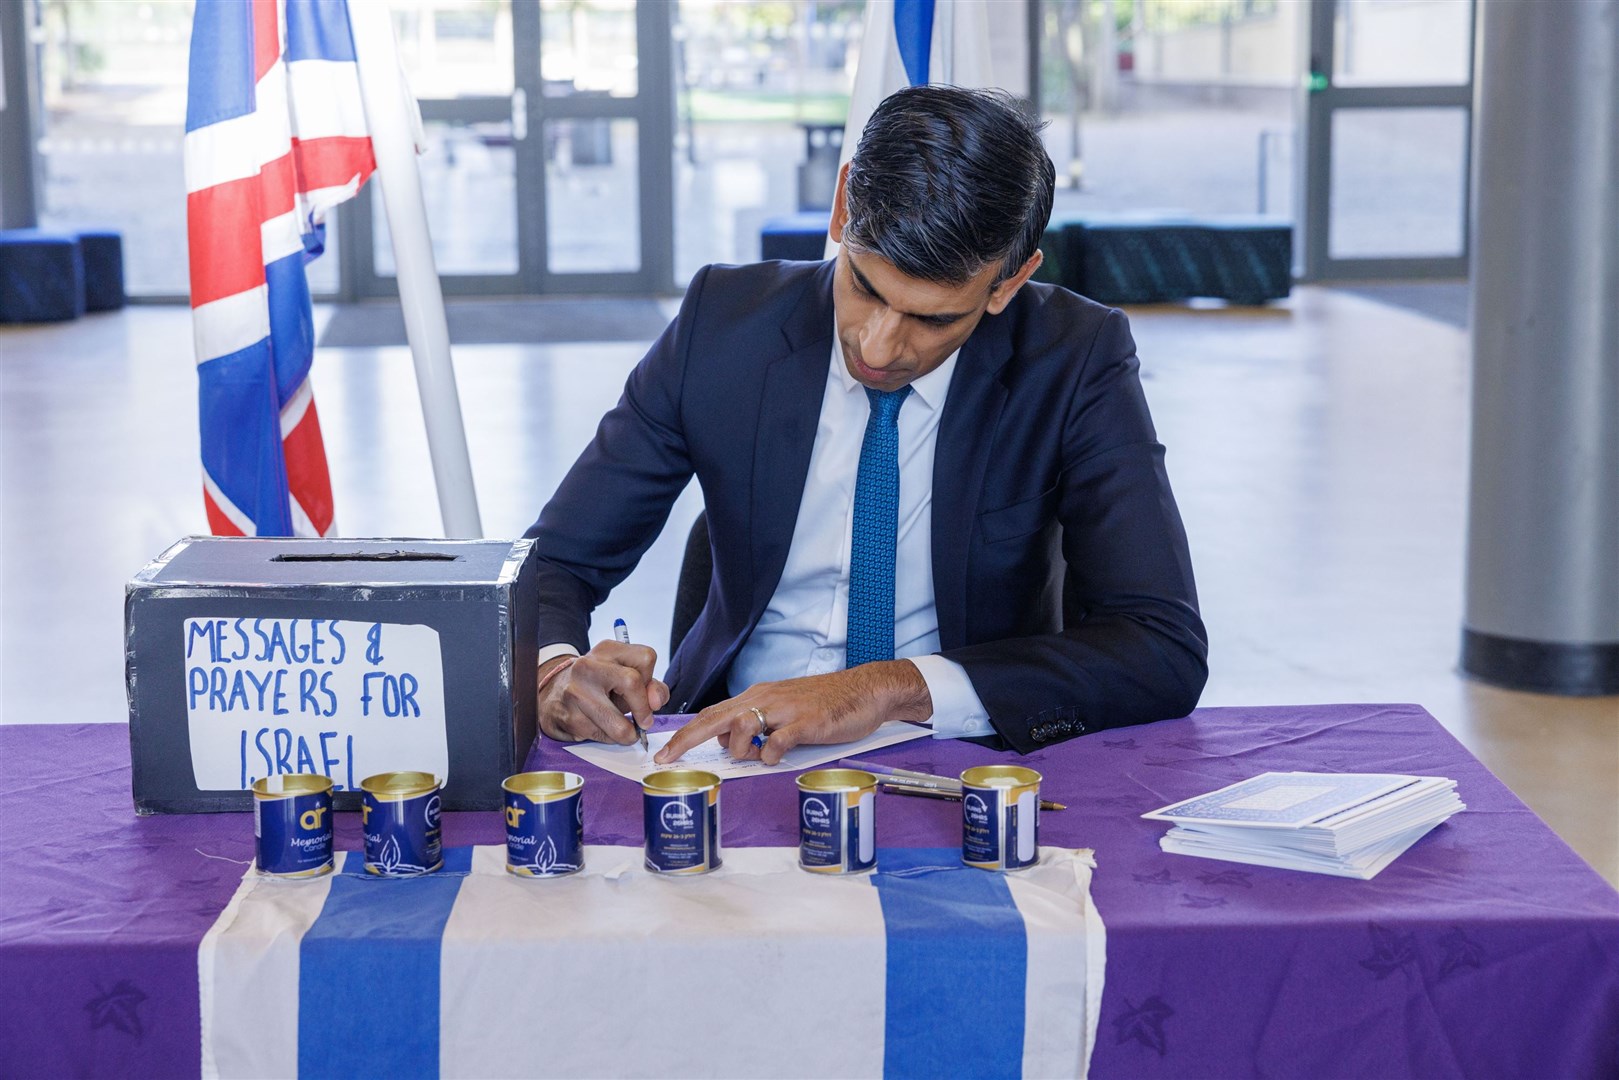 Prime Minister Rishi Sunak reiterated his support for the Jewish community in Britain (Jonathan Buckmaster/Daily Express/PA)